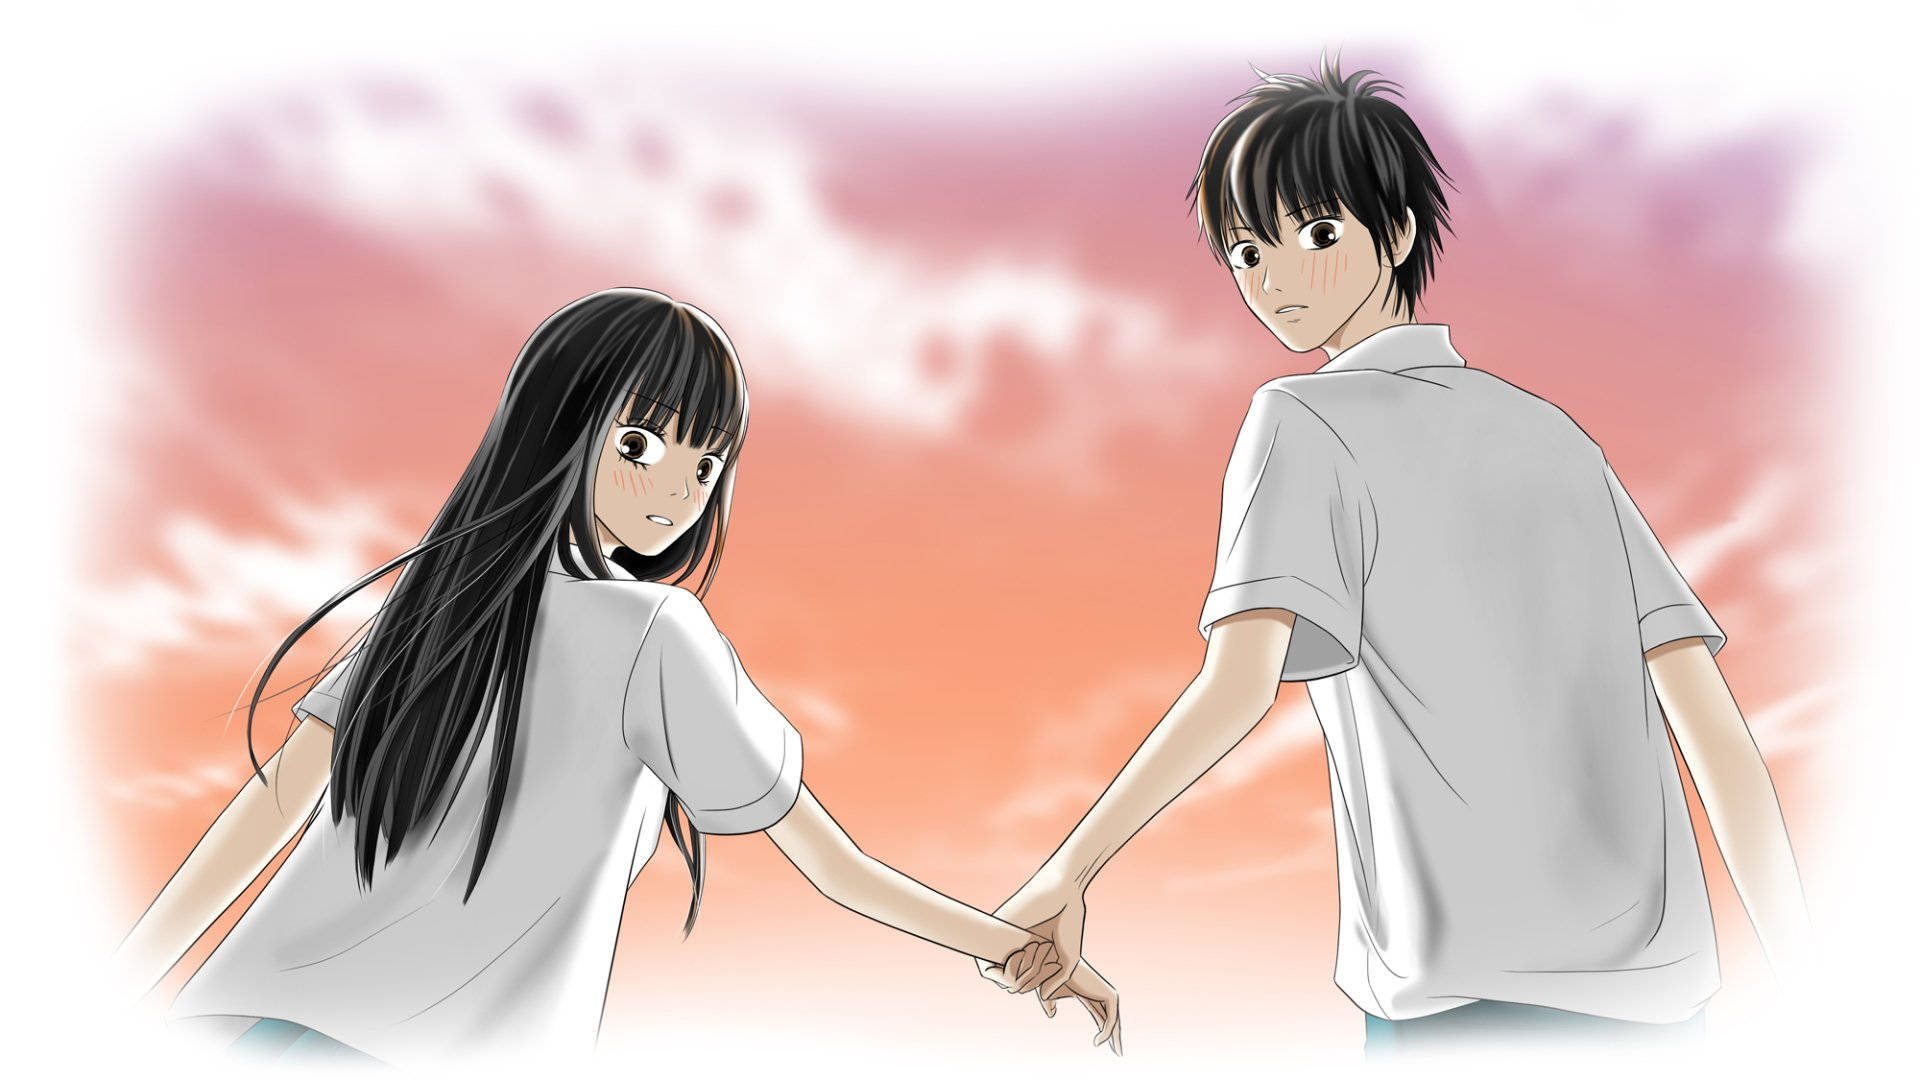 Anime Couple: A Moment Of Love Captured From Kimi Ni Todoke Background